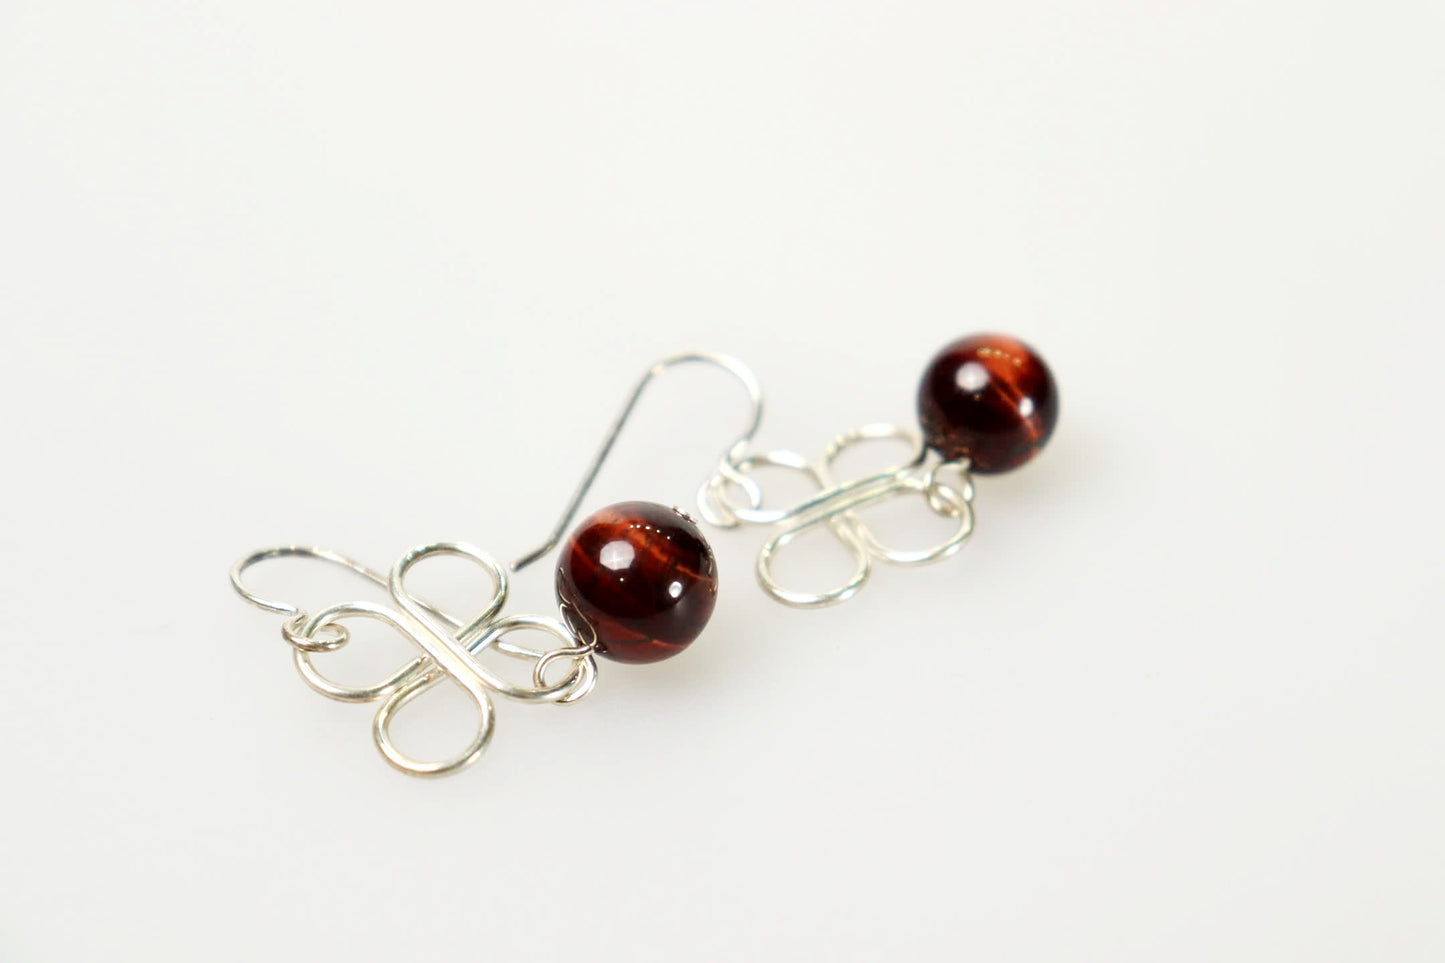 Clover Sterling Silver and Tiger's Eye Earrings